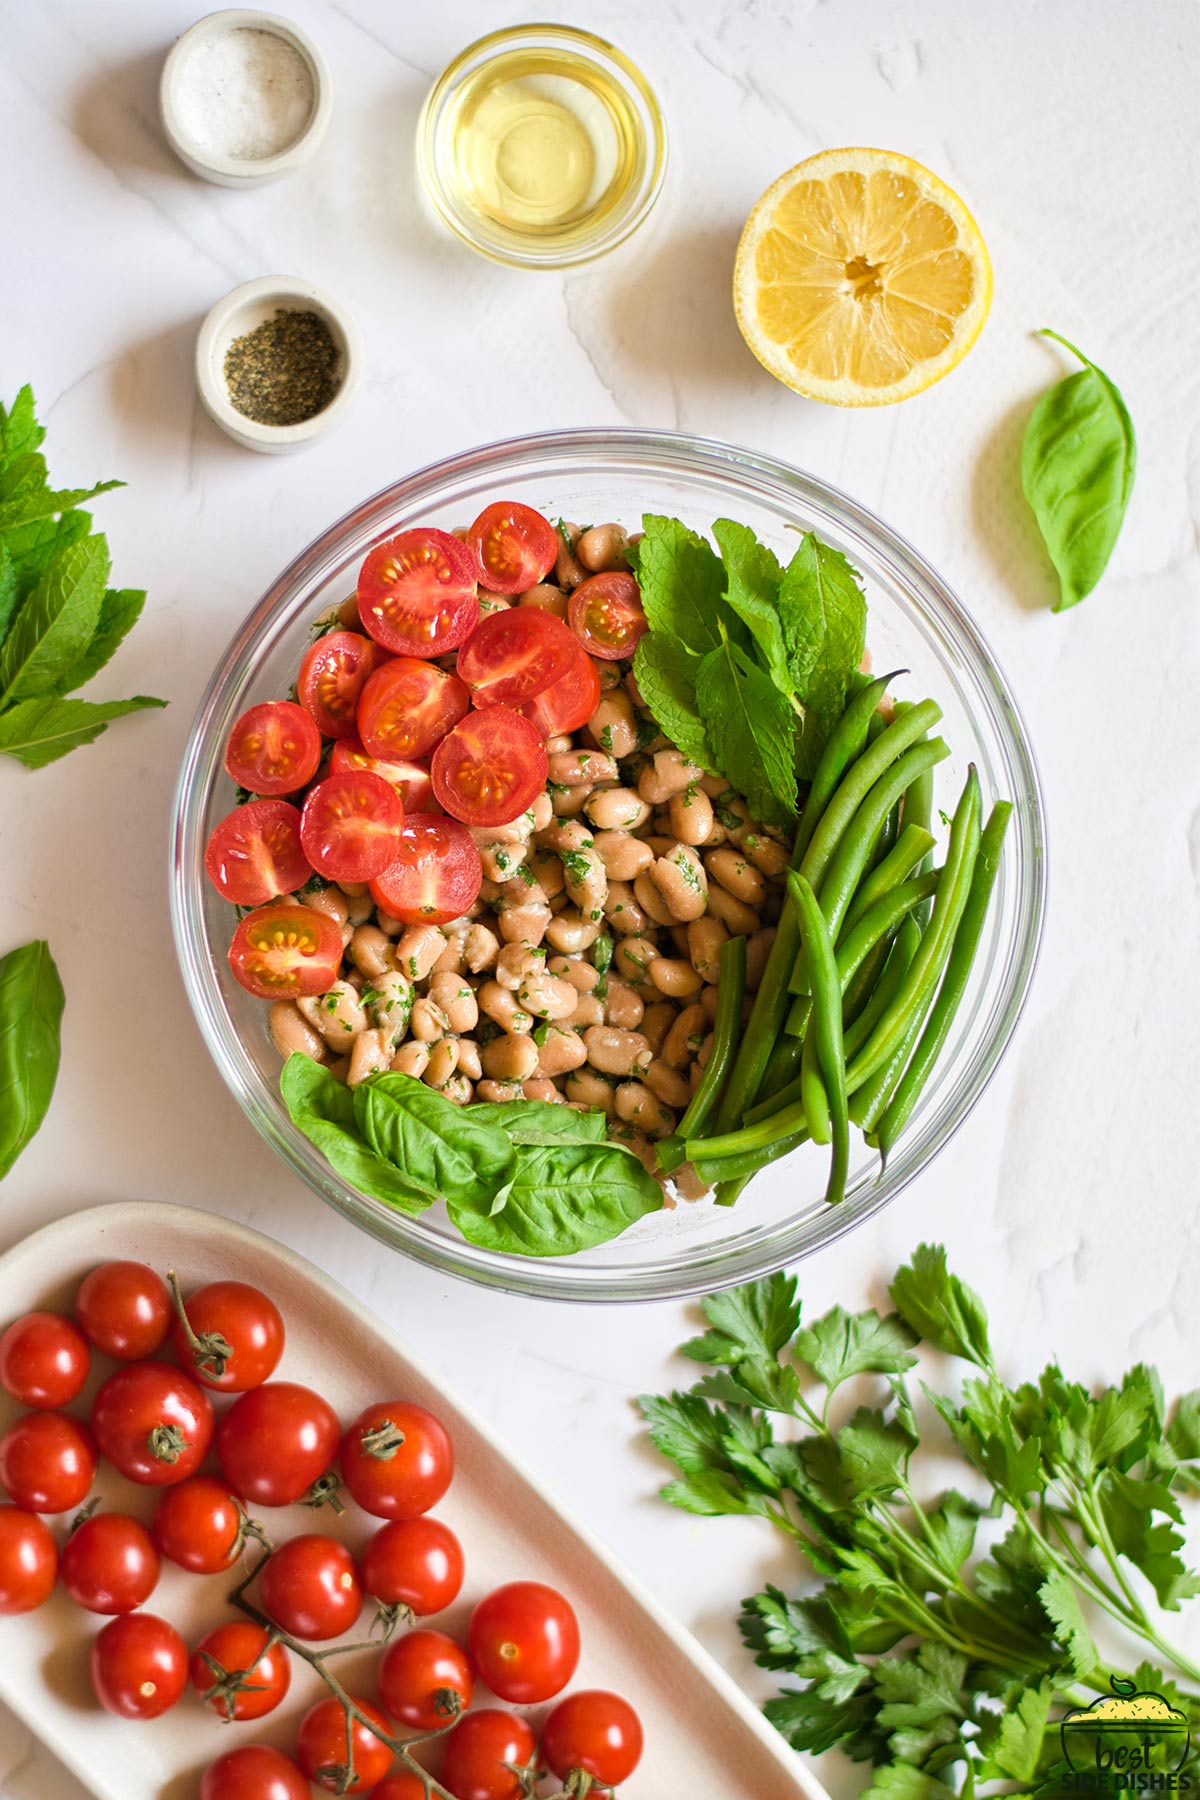 tomatoes, herbs, and beans in a glass bowl